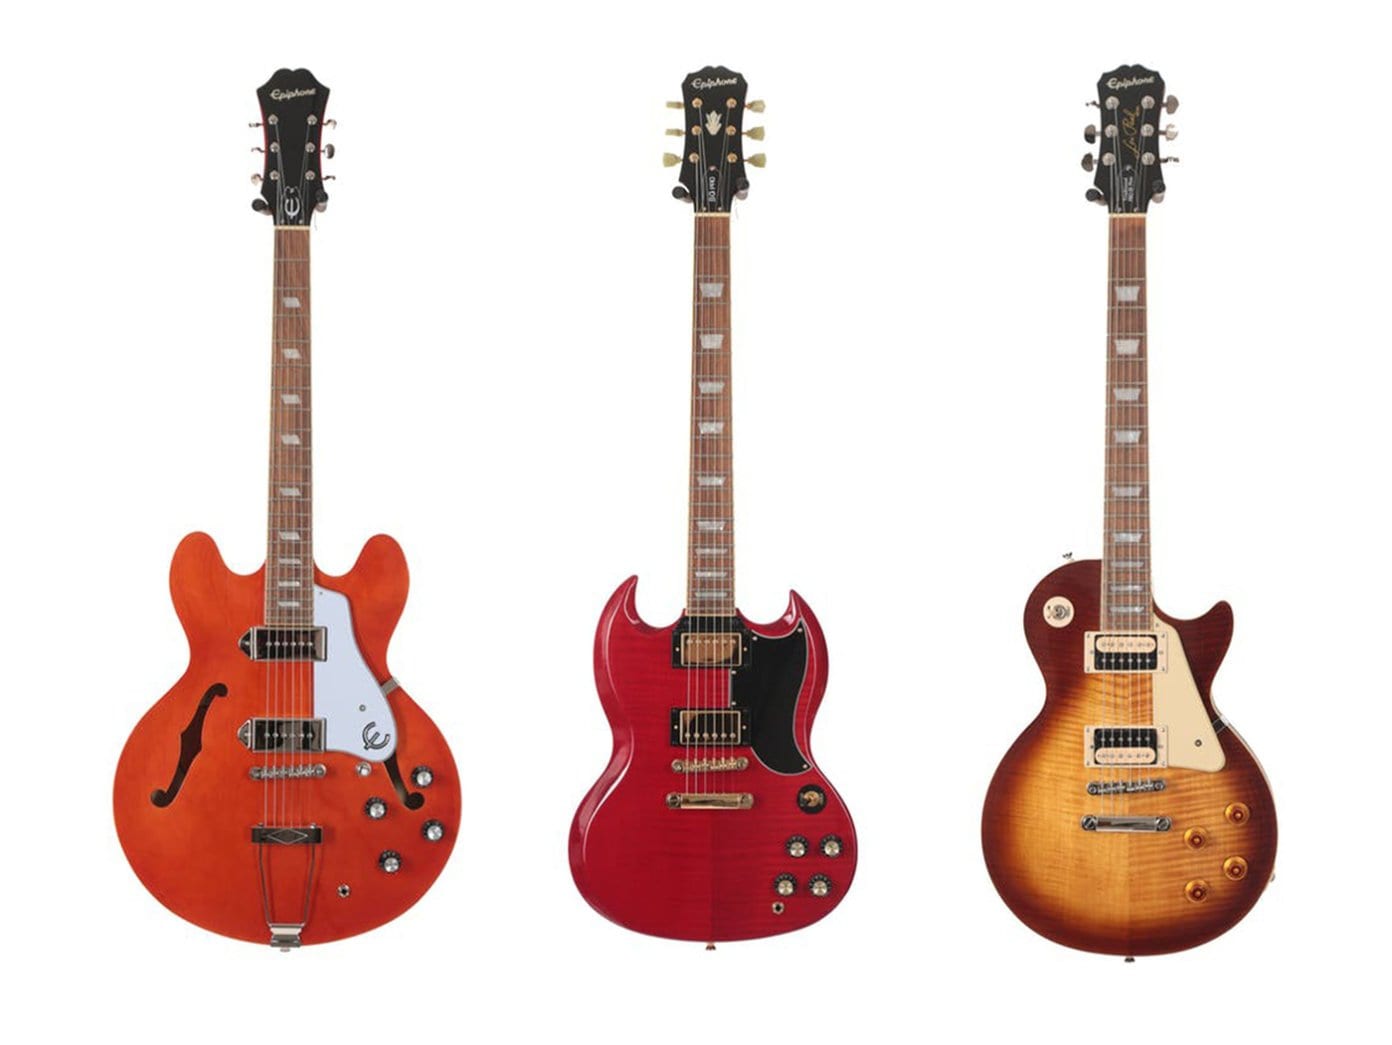 Epiphone Limited Editioon Pro and Lite models